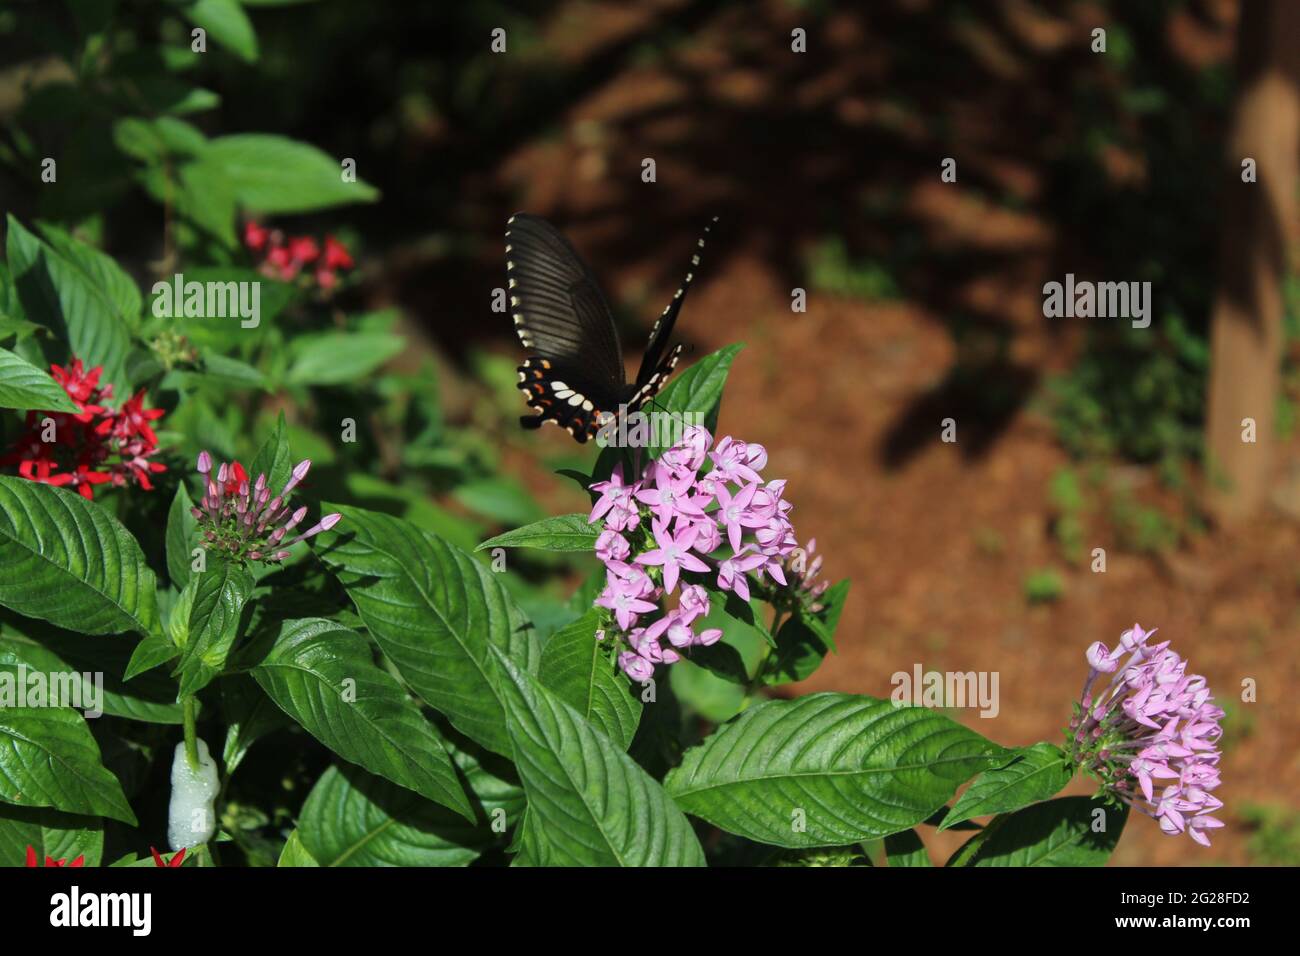 Butterfly coming to Collect Nectar from Small Bunch of Violet Flowers: Egyptian star-cluster (Rubiaceae) Pentas lanceolata (Forssk.) Deflers, Pentas Stock Photo